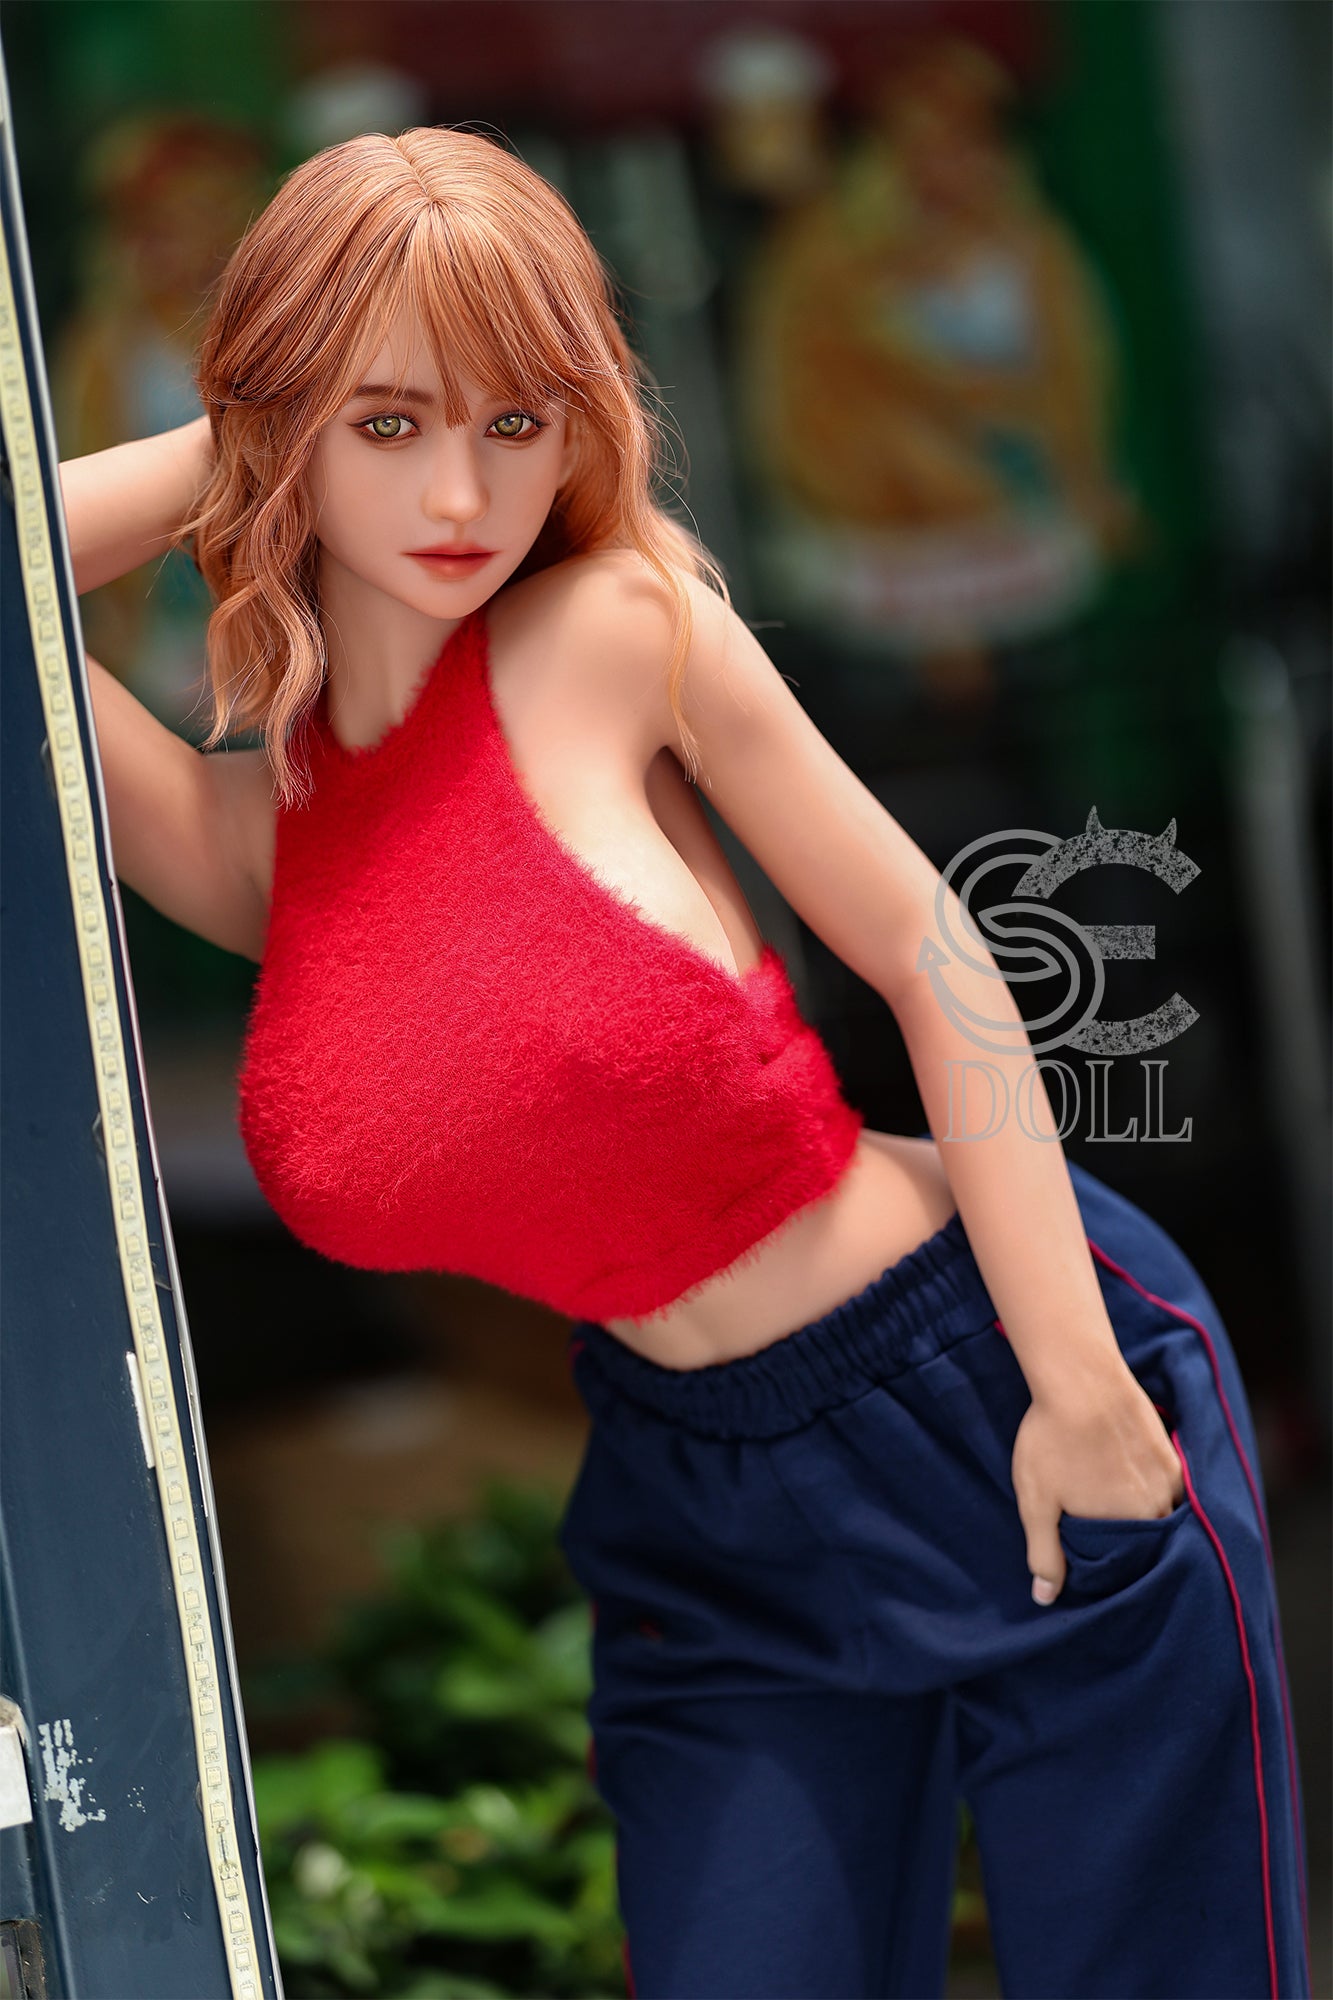 SEDOLL 161 cm F TPE - Phoebe | Buy Sex Dolls at DOLLS ACTUALLY